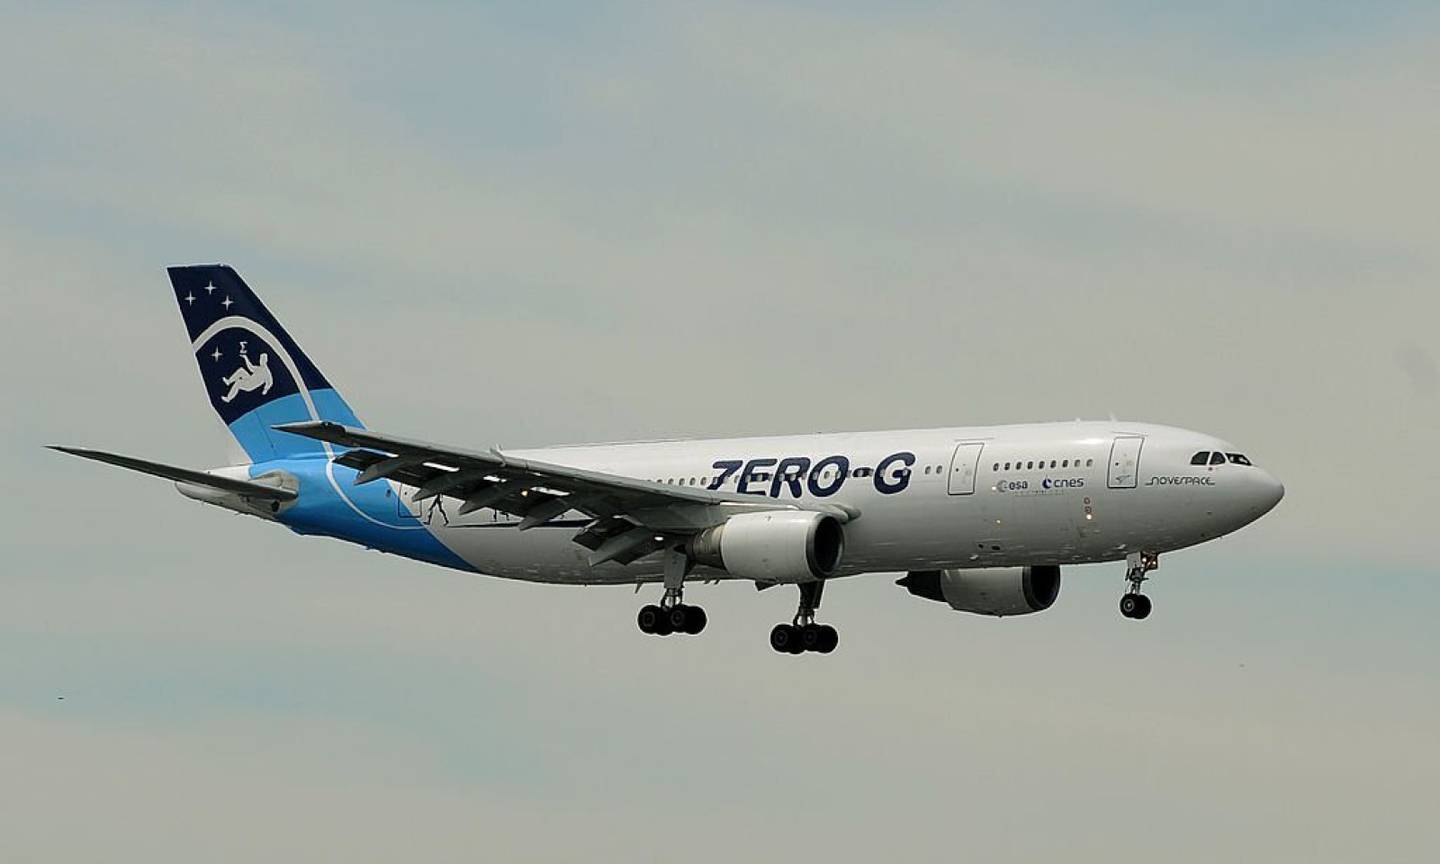 The operation was done in the Airbus A300 ZeroG